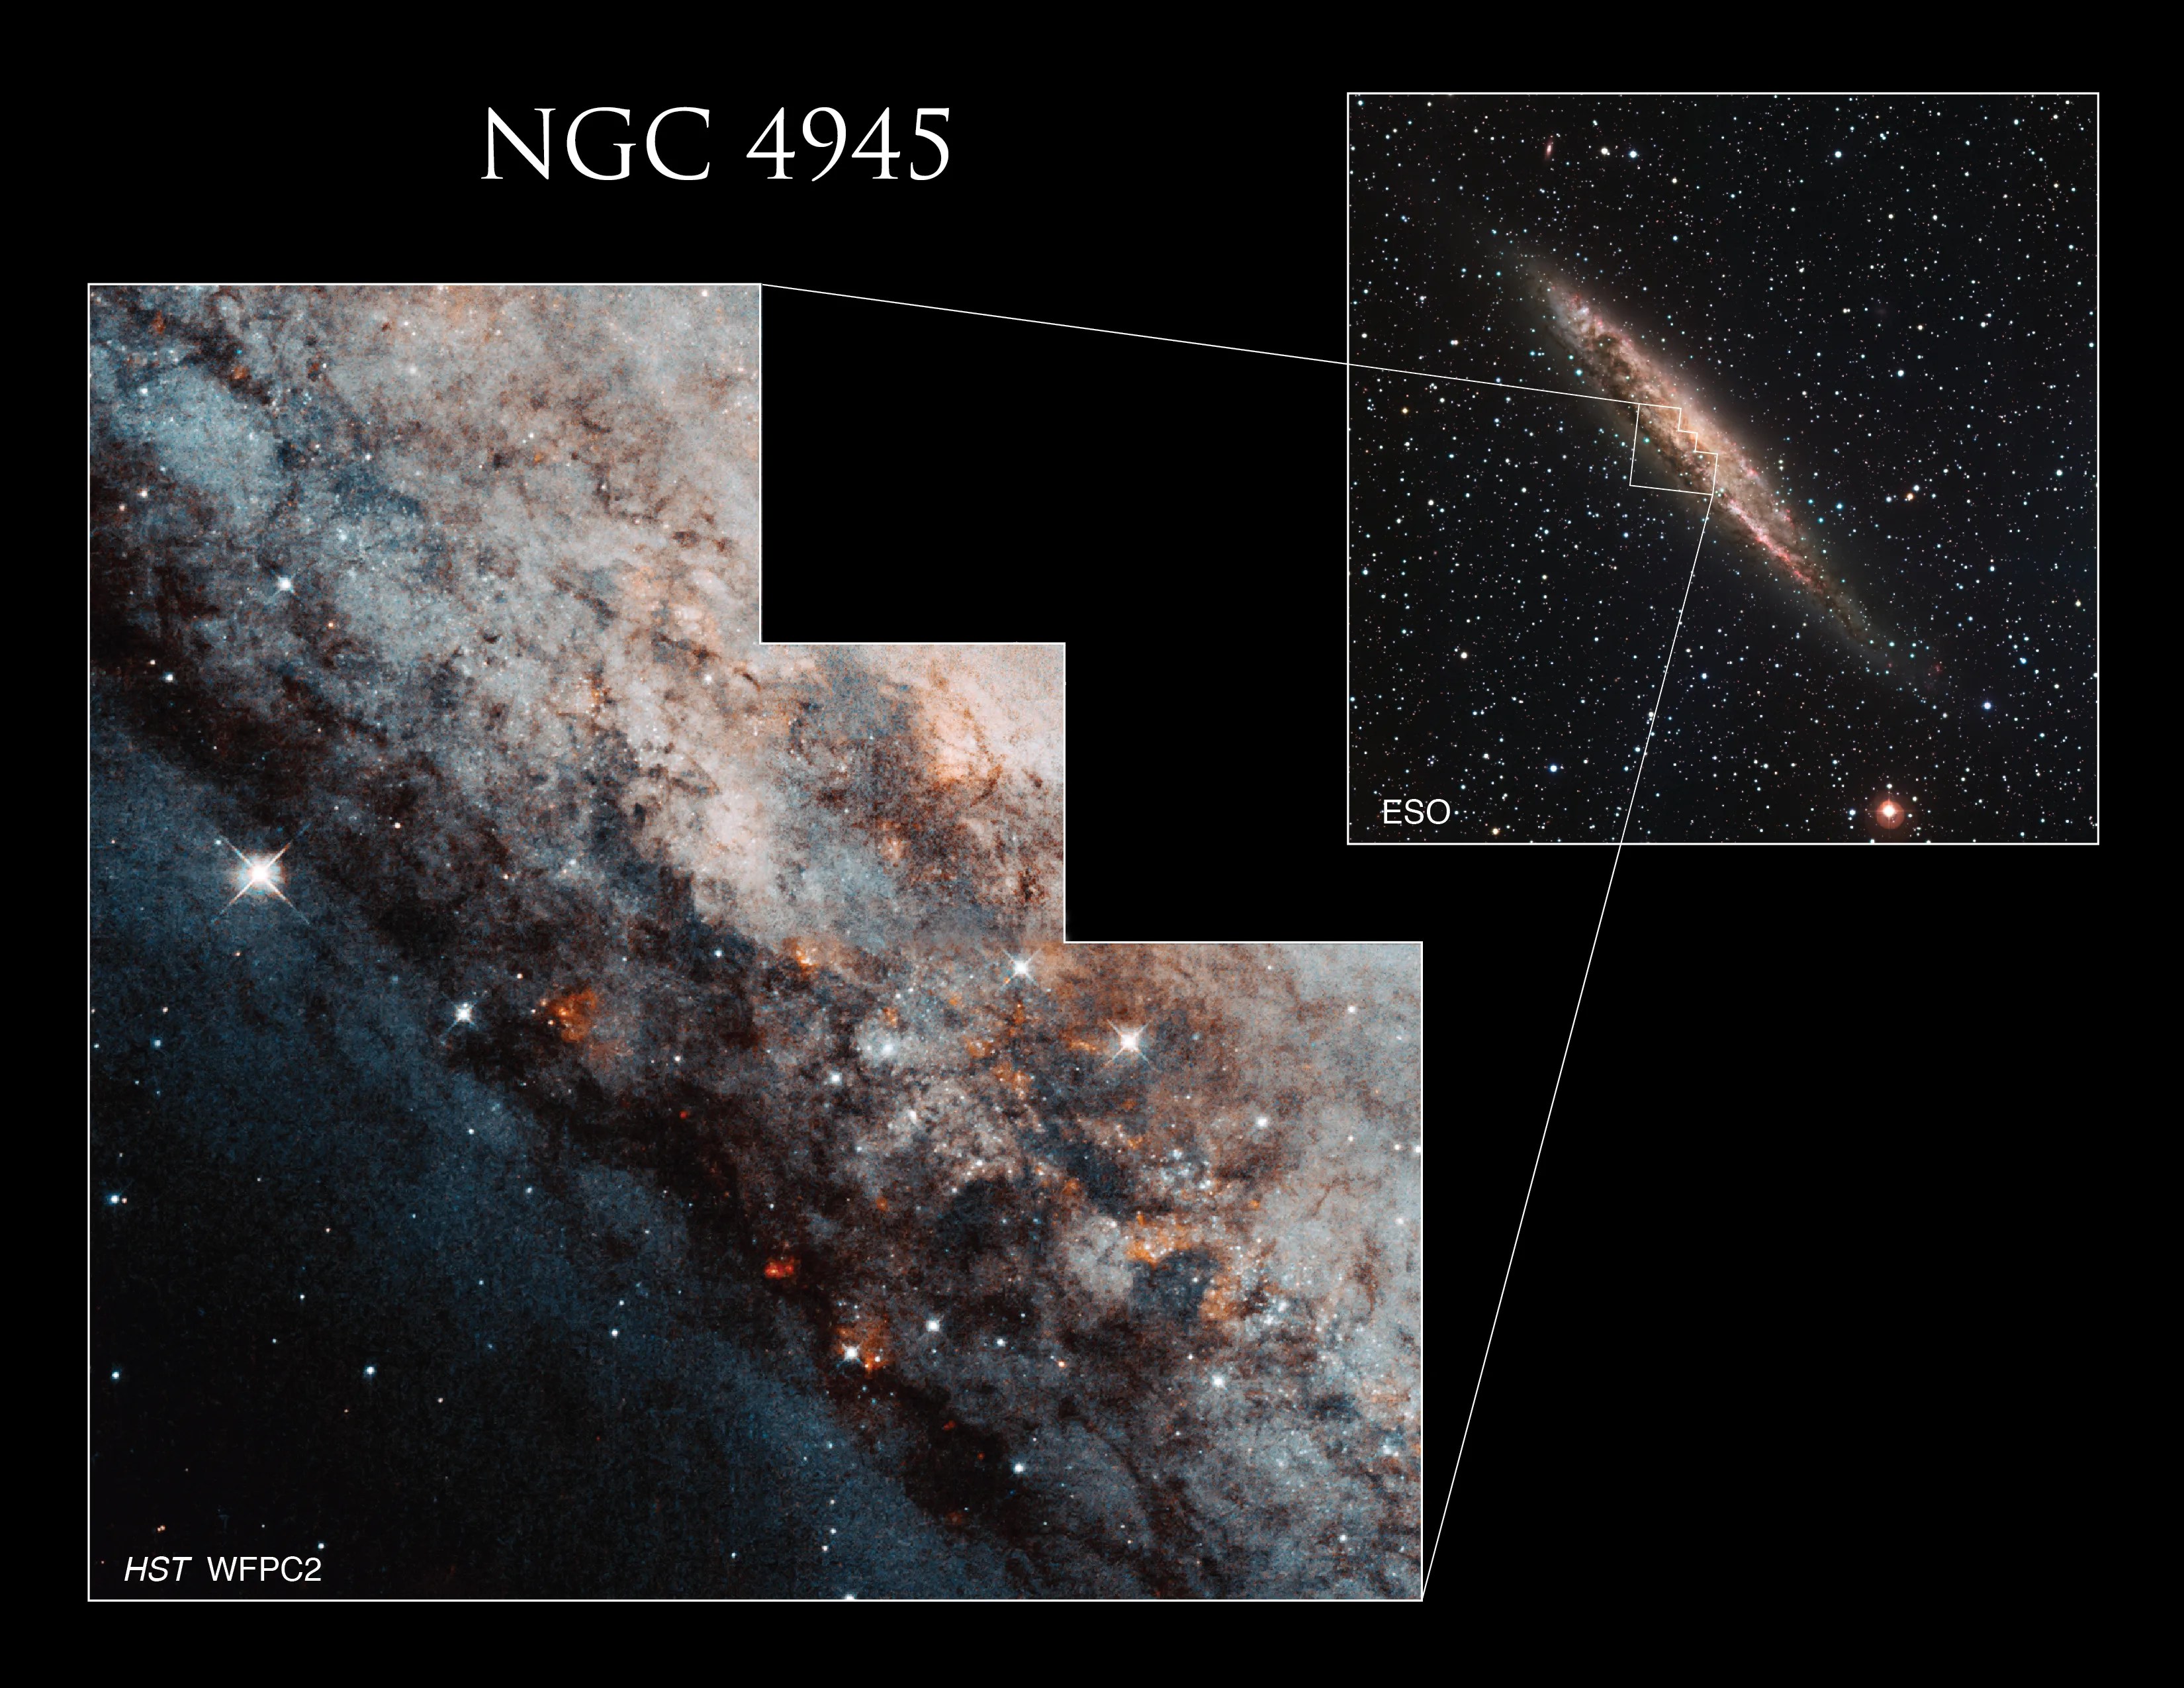 A ground-based image from the European Southern Observatory (ESO), in the upper right, shows the entire long, edge-on galaxy and includes an outline that shows the region near the center of Caldwell 83 observed by Hubble’s Wide Field and Planetary Camera 2. To the left is the Hubble image, showing dark dust lanes scattered with white and red stars.